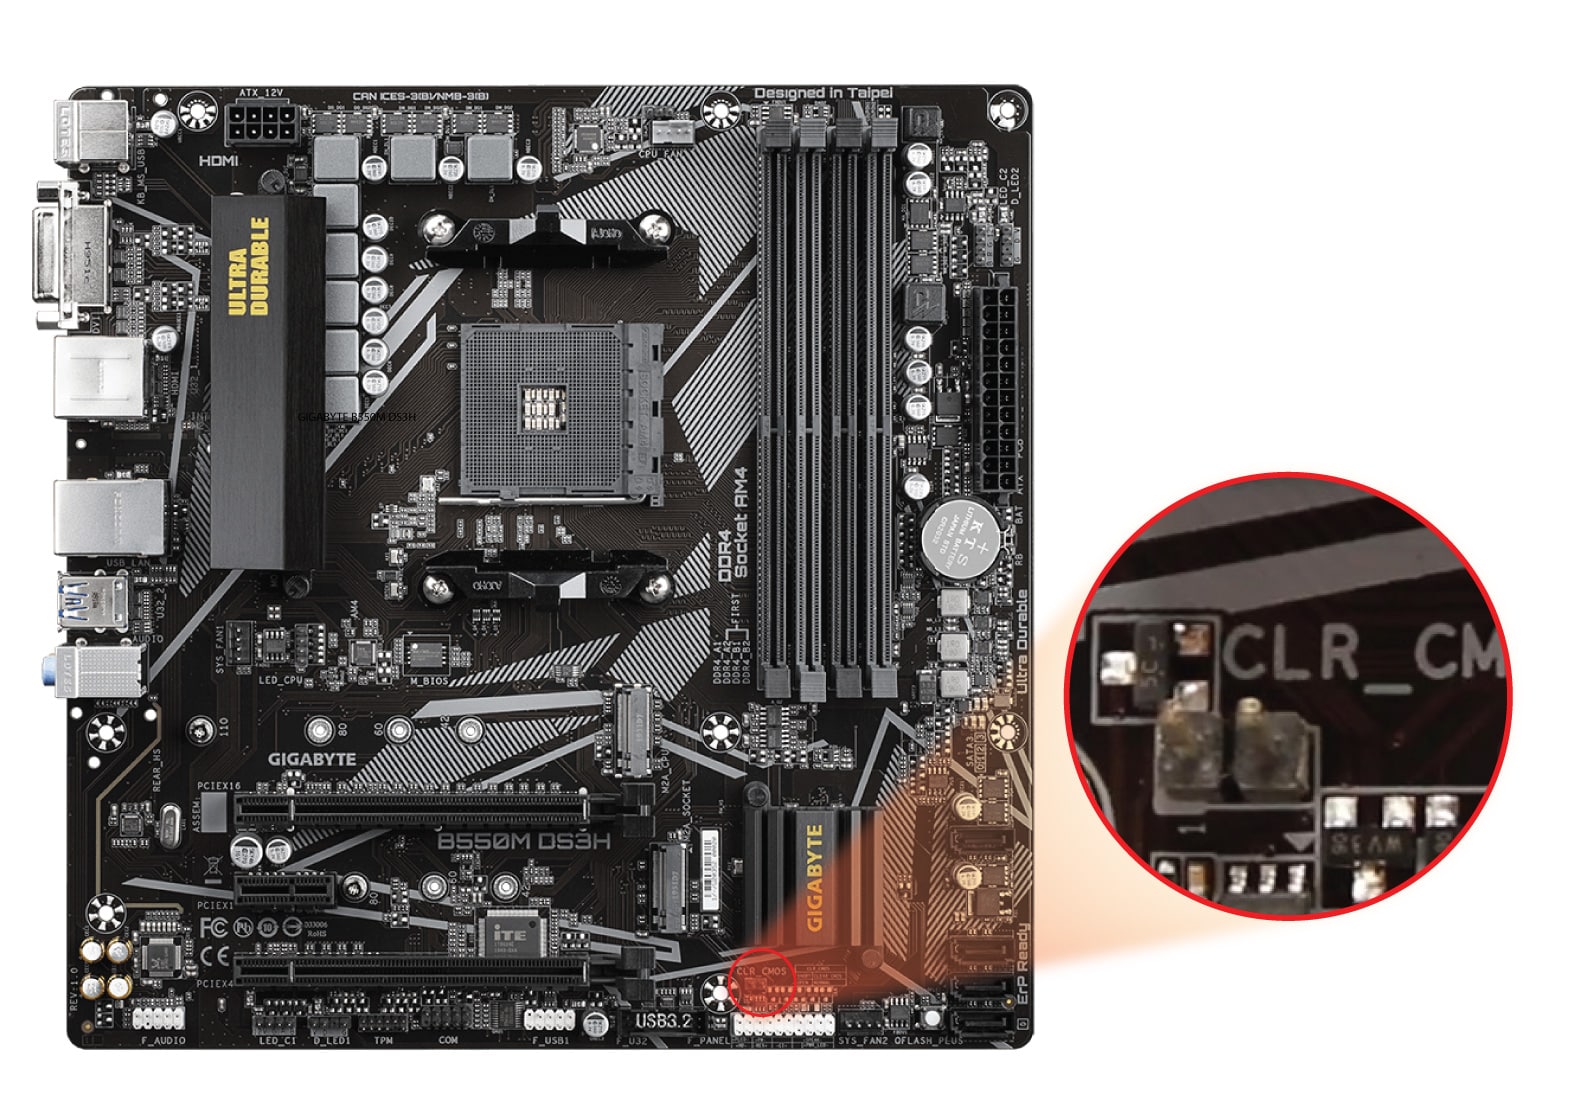 Showing CMOS jumper location on GIGABYTE B550M DS3H (and AC) motherboard.